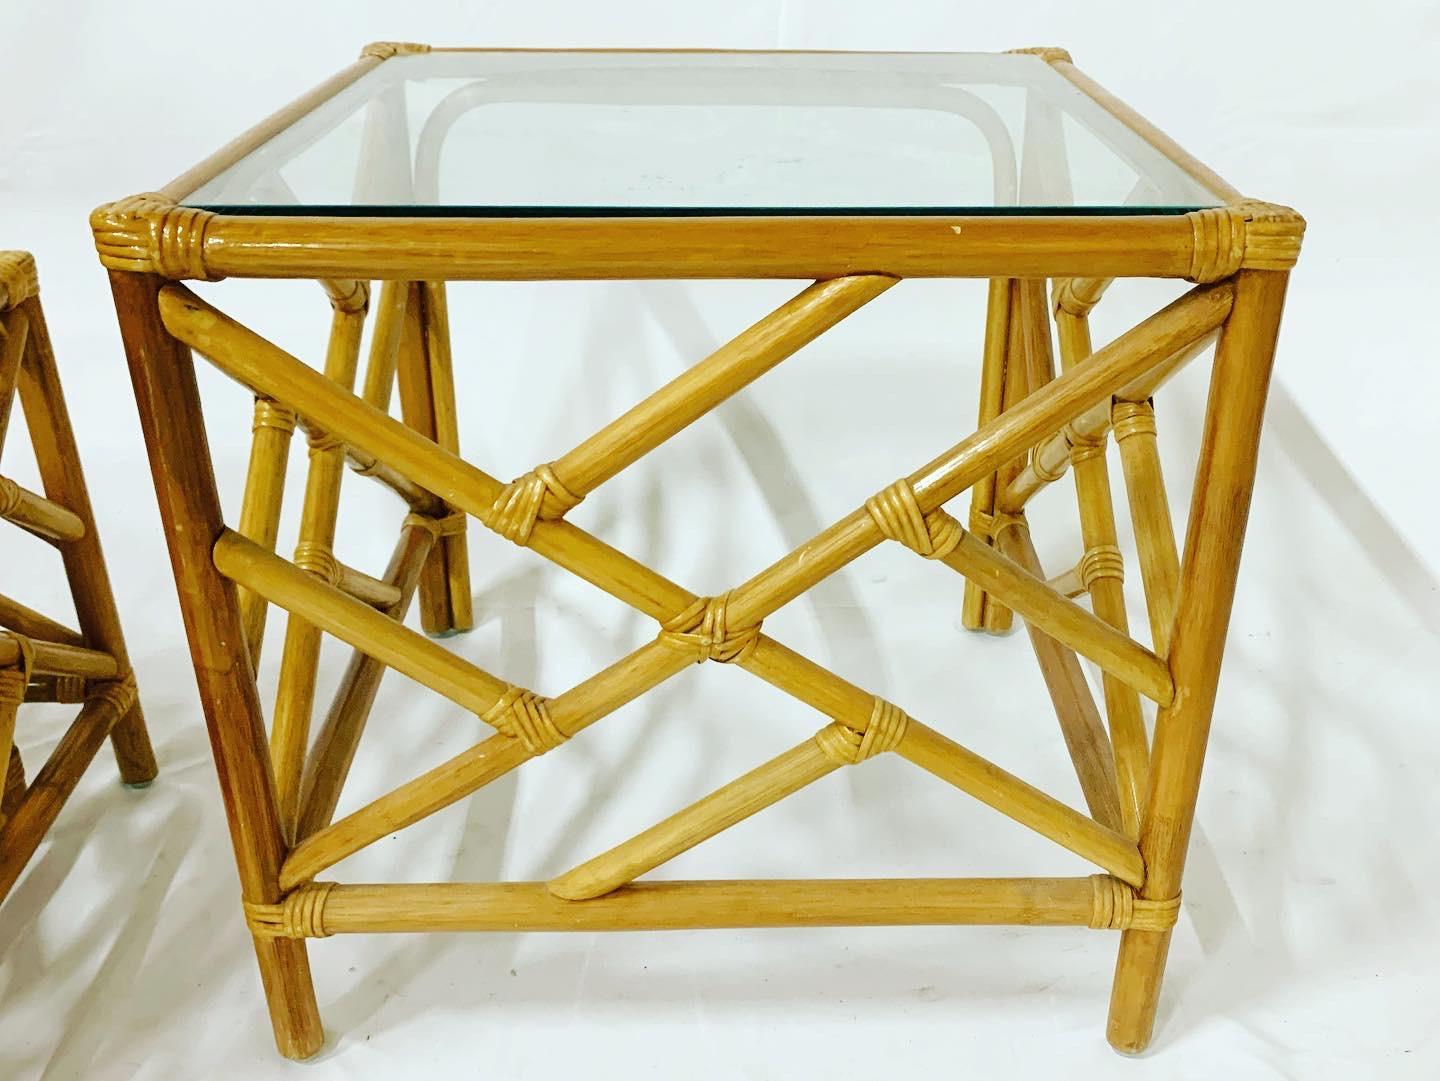 Chippendale Bamboo Rattan Nesting Tables – Set of 3 5